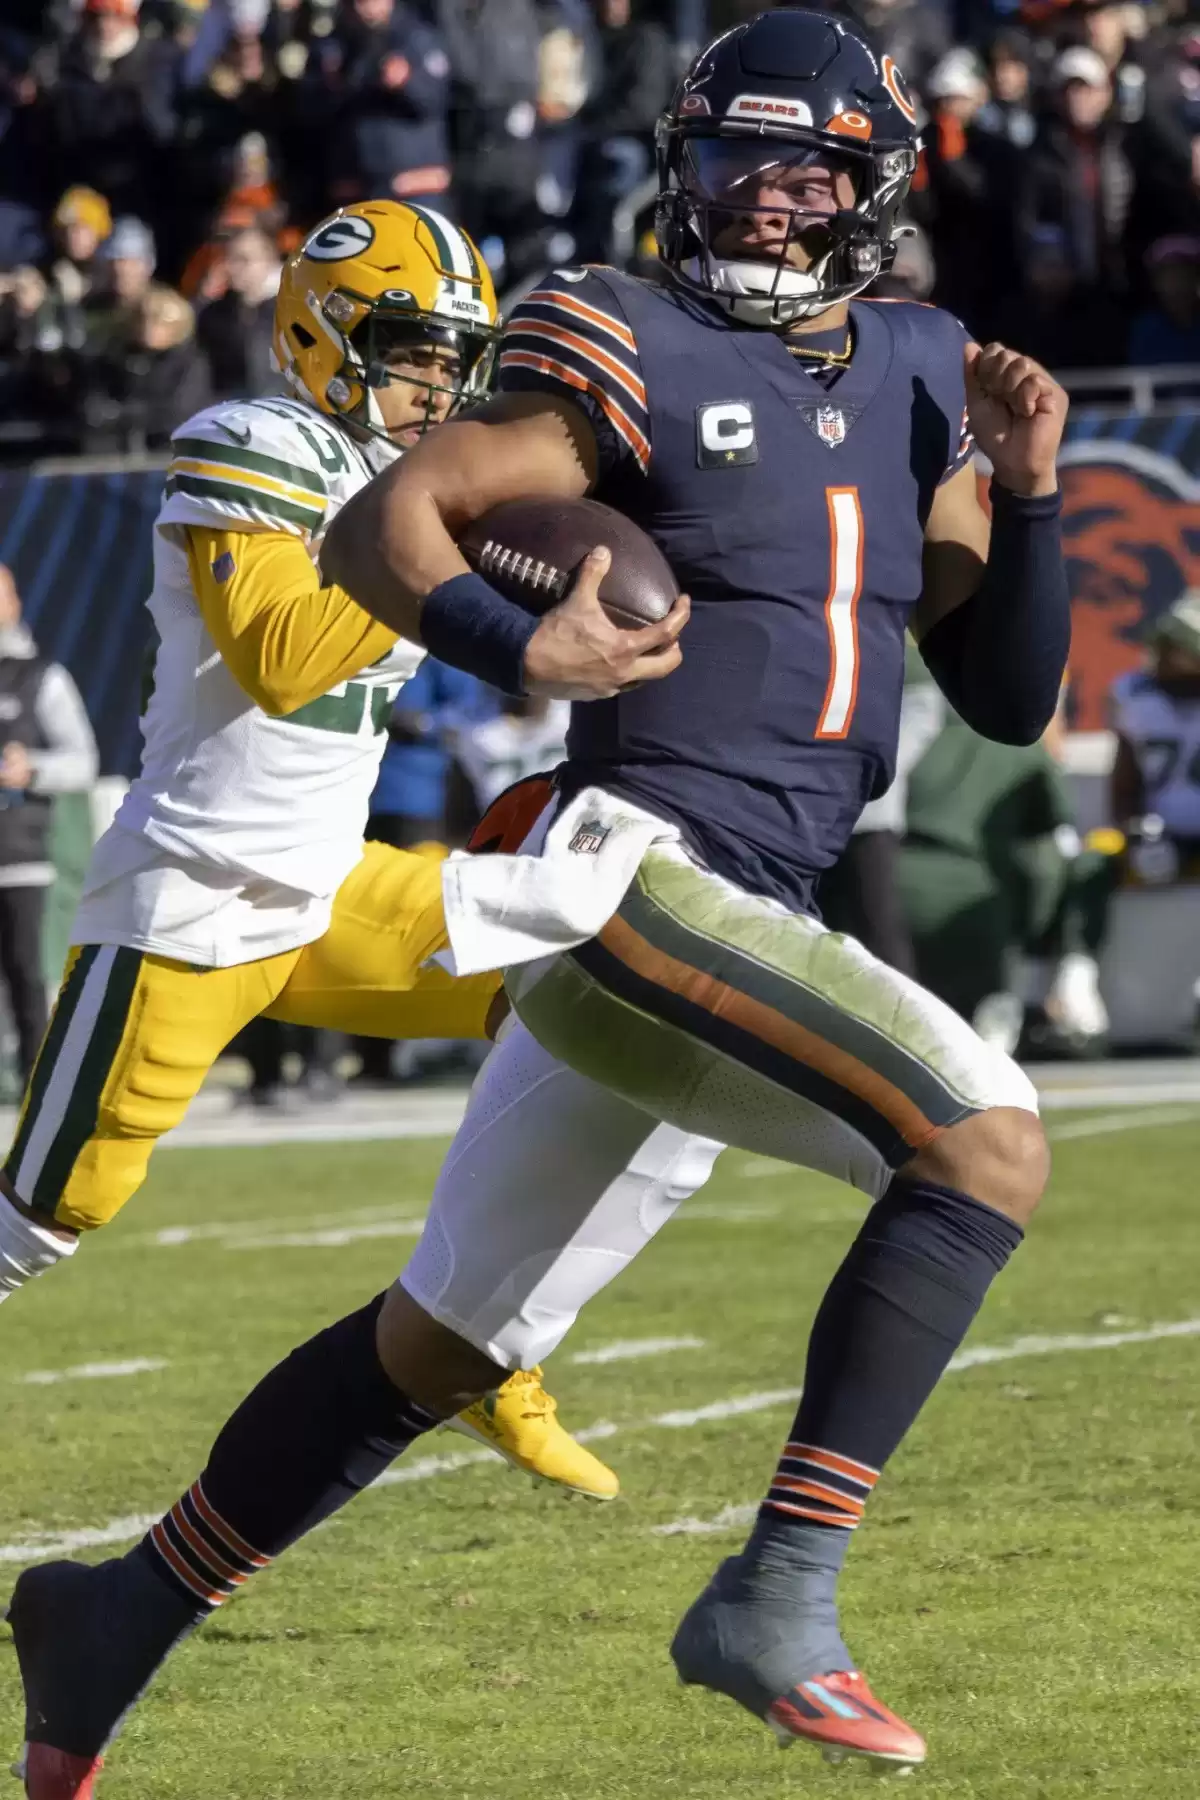 QB Jordan Love arrival: Does it signal a turning of the tide in Chicago Bears-Green Bay Packers rivalry?